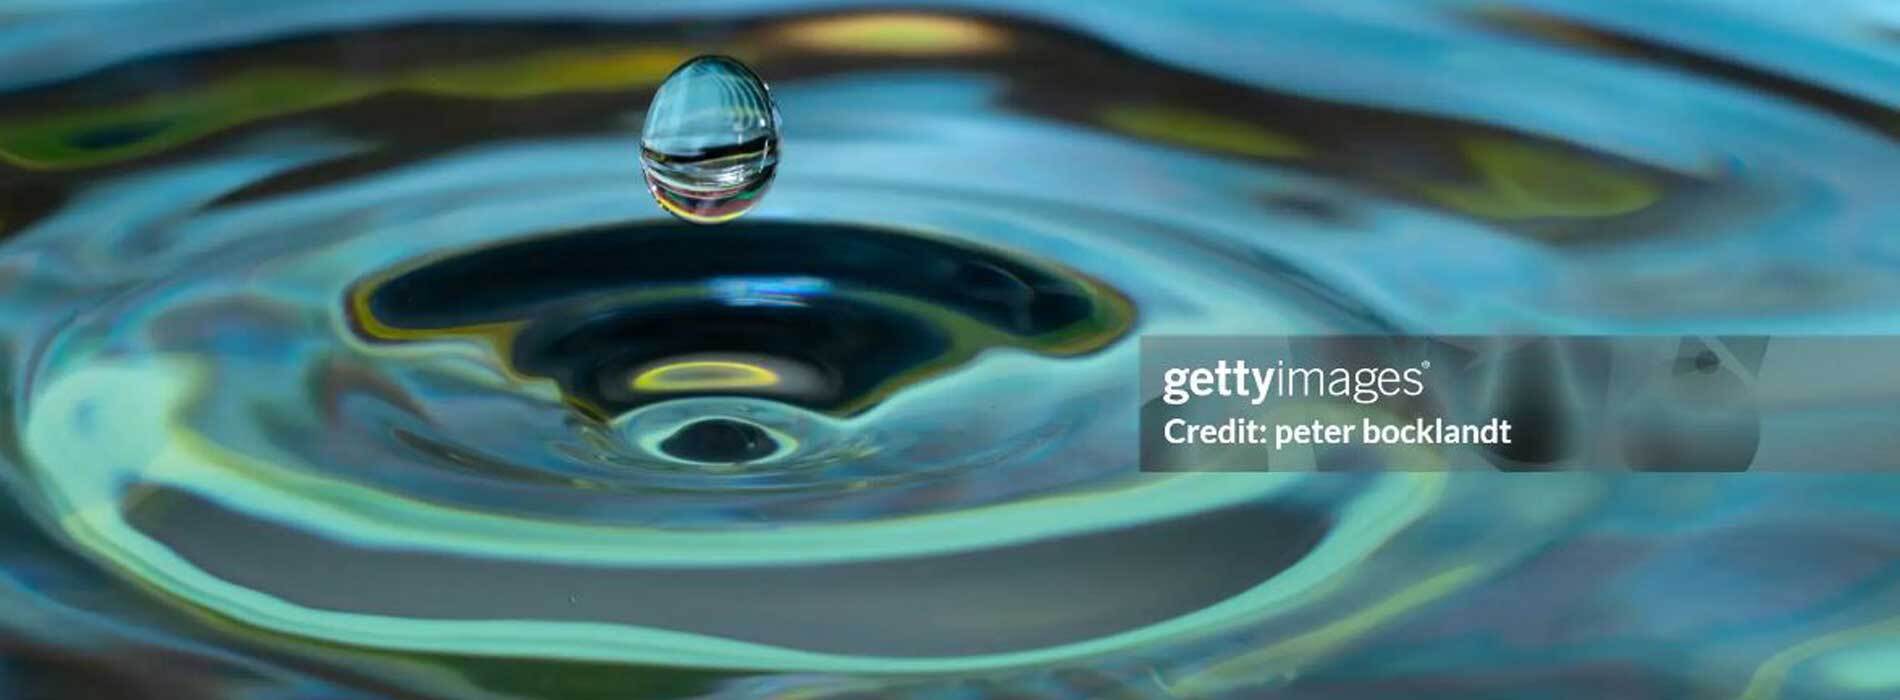 Close-up of a water droplet creating ripples on a colorful surface.